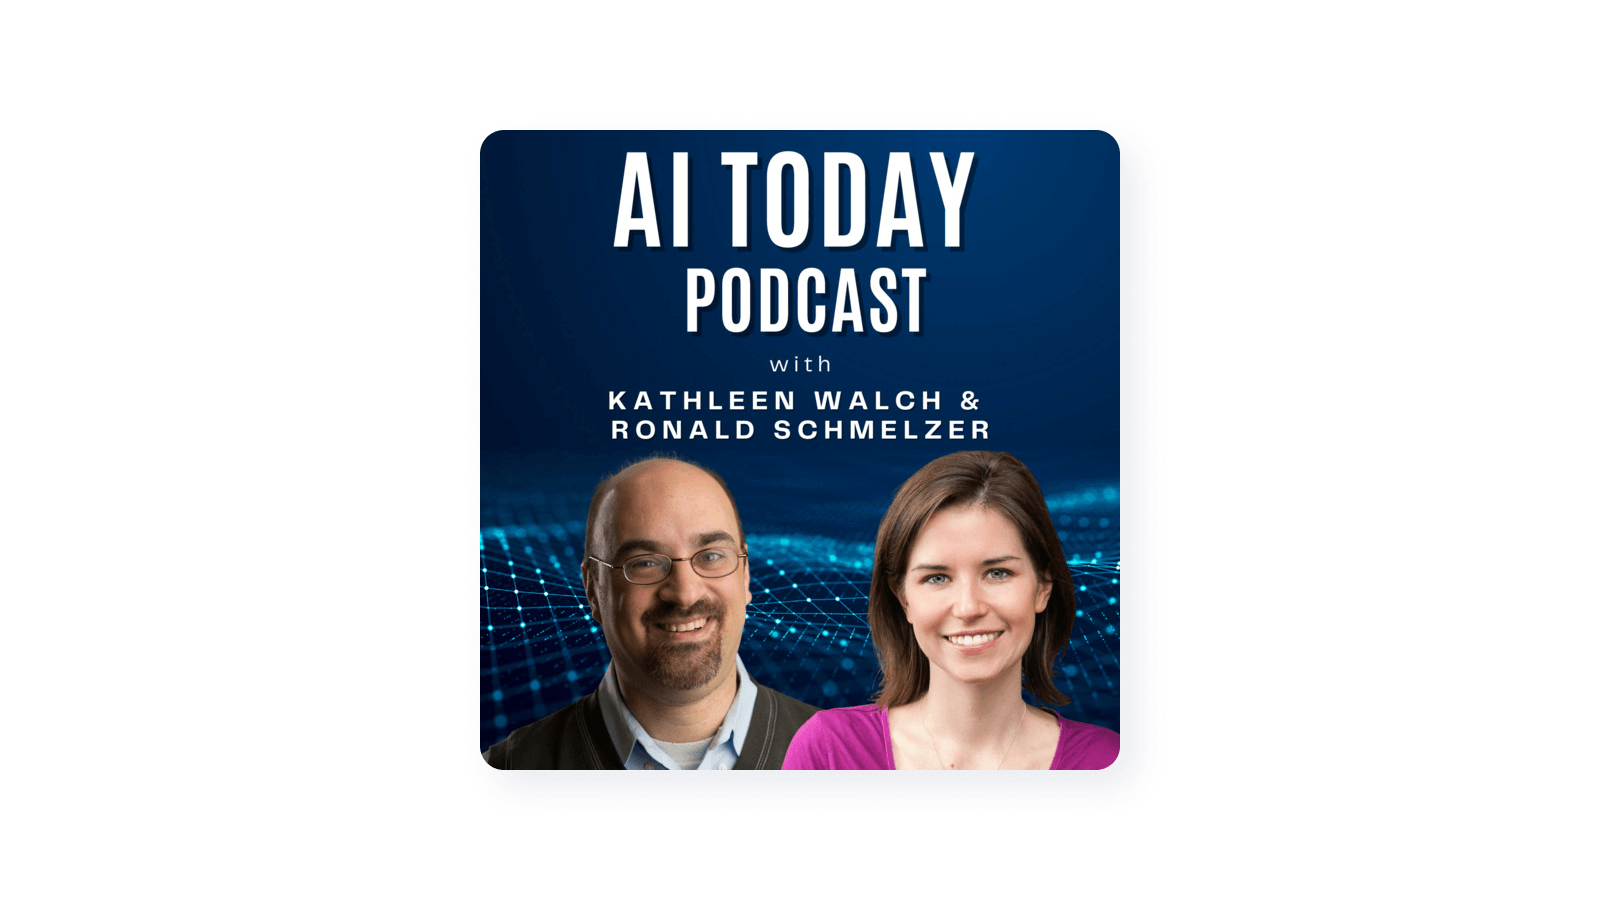 The AI Today Podcast